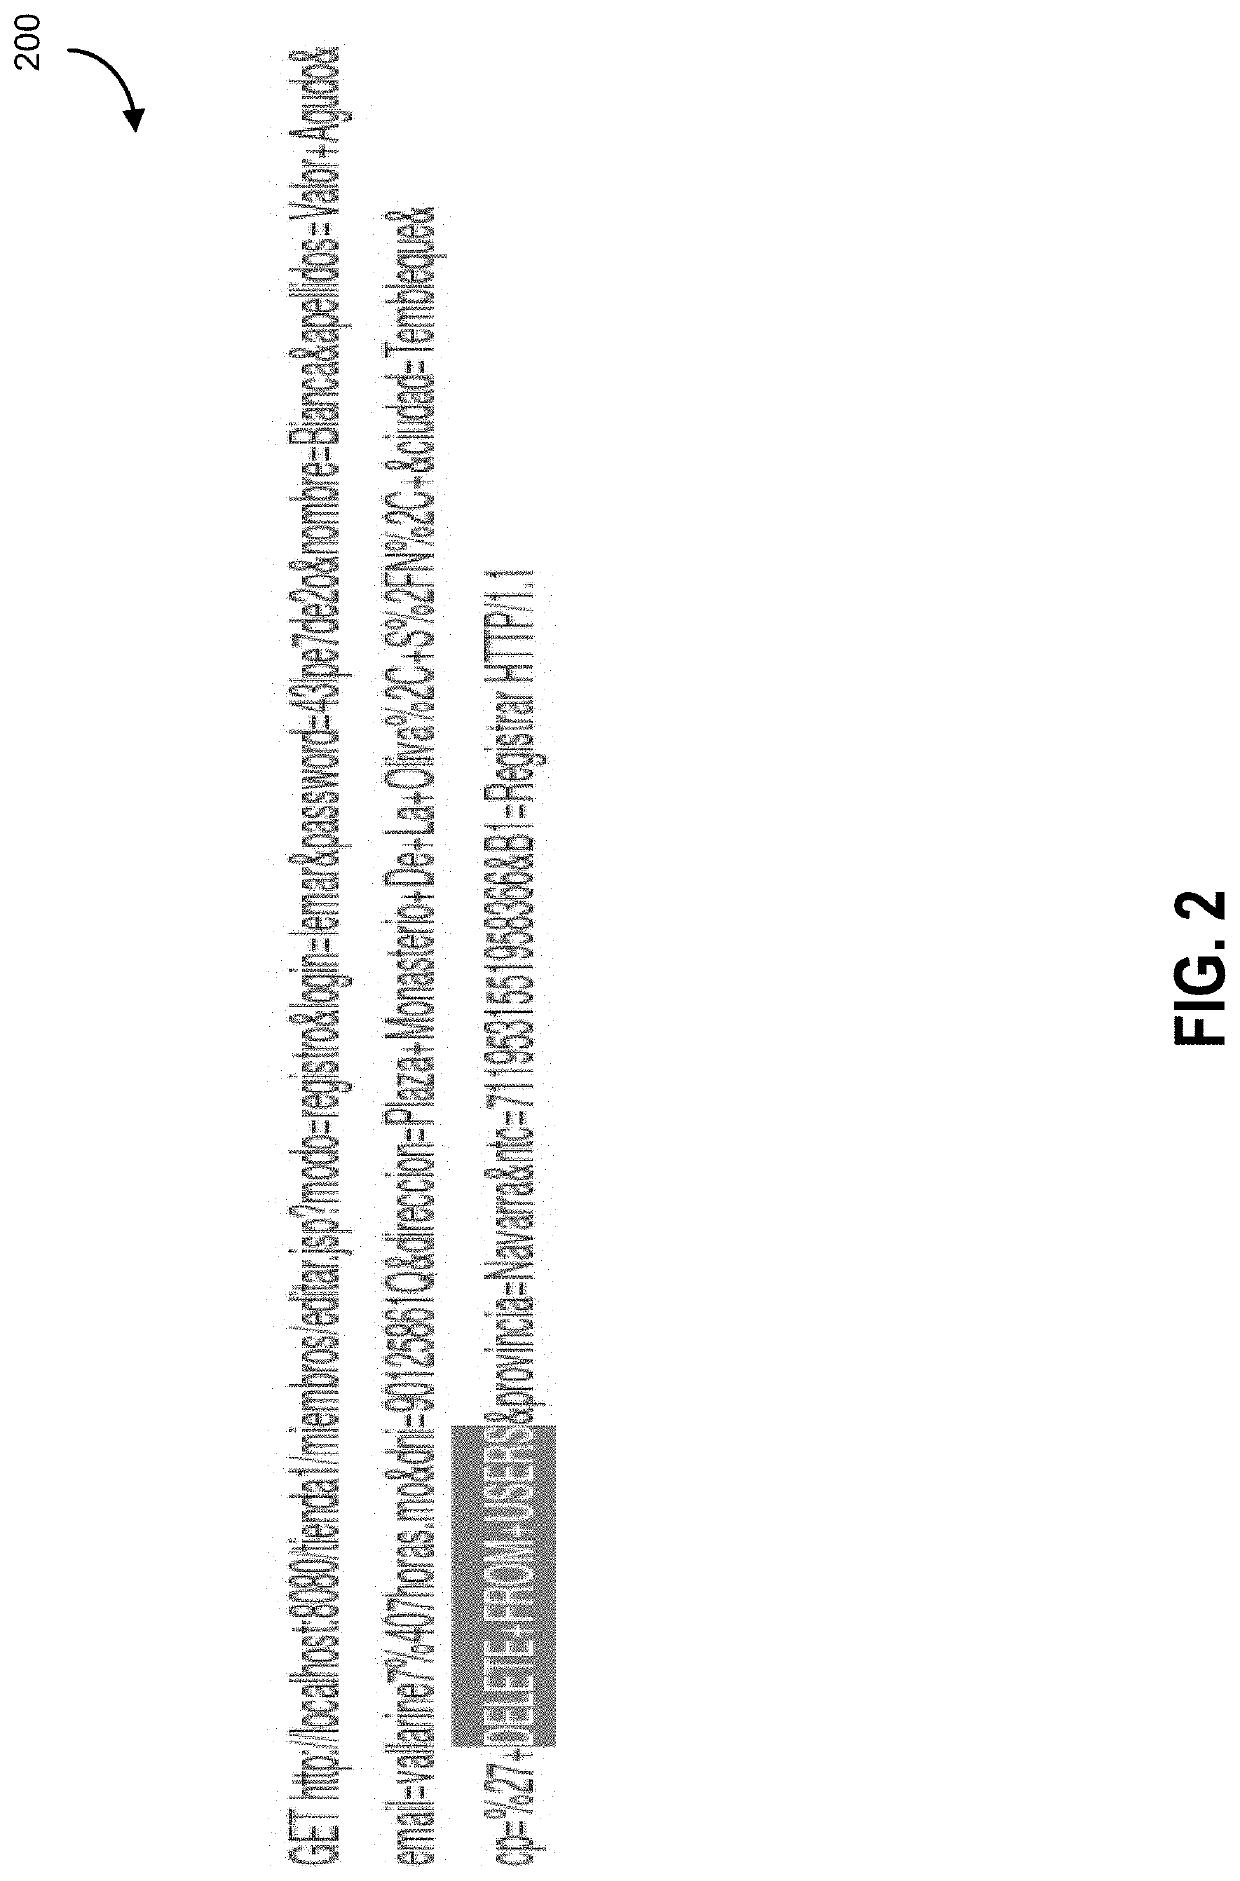 Systems and methods for malicious code detection